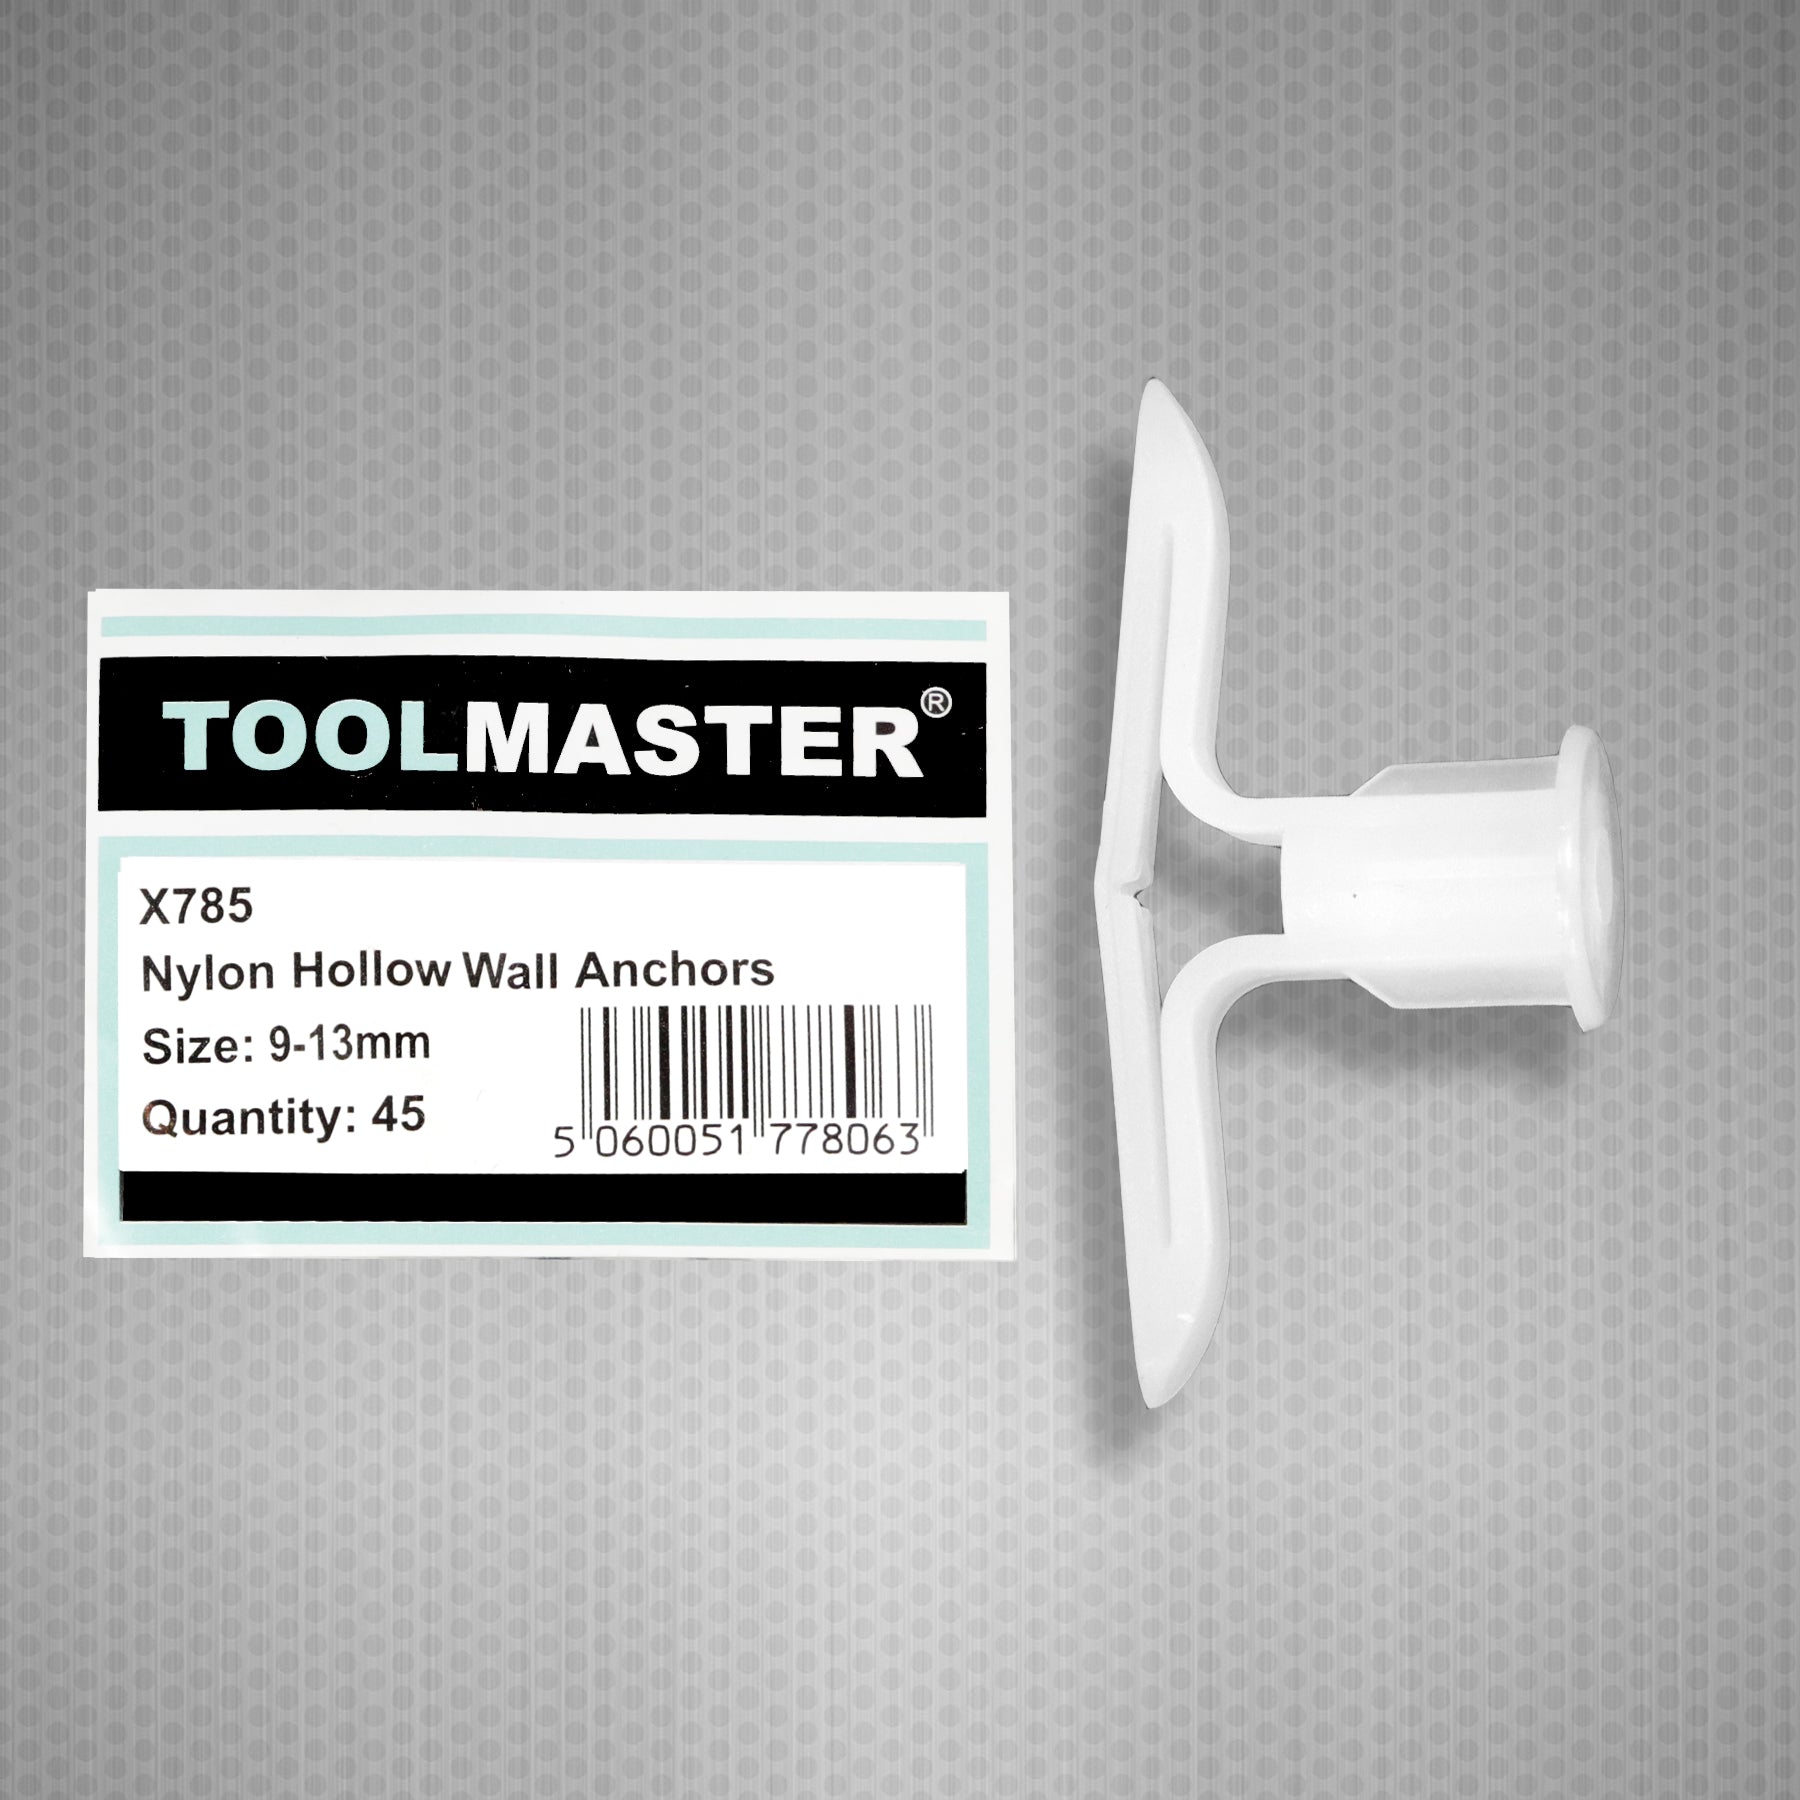 Toolmaster Nylon Hollow Wall Anchors - Size 9-13mm